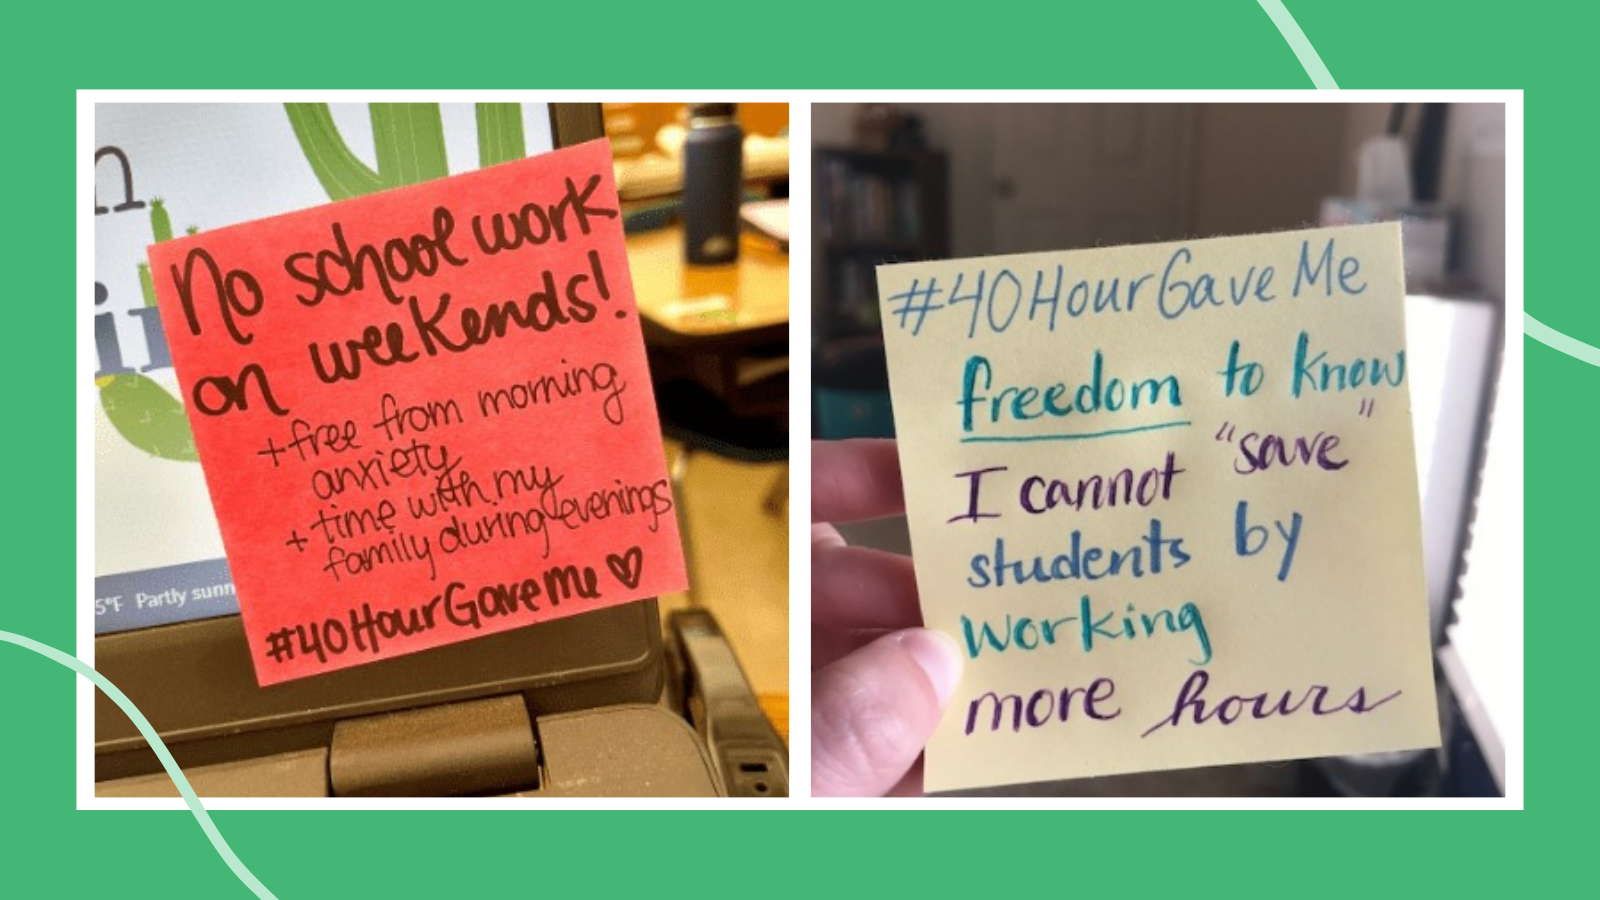 40 Hour Teacher Workweek Reviews on post-its that say "No school work on weekends #40HourGaveMe" and "#40HourGaveMe freedom to know I cannot 'save' my students by working more."